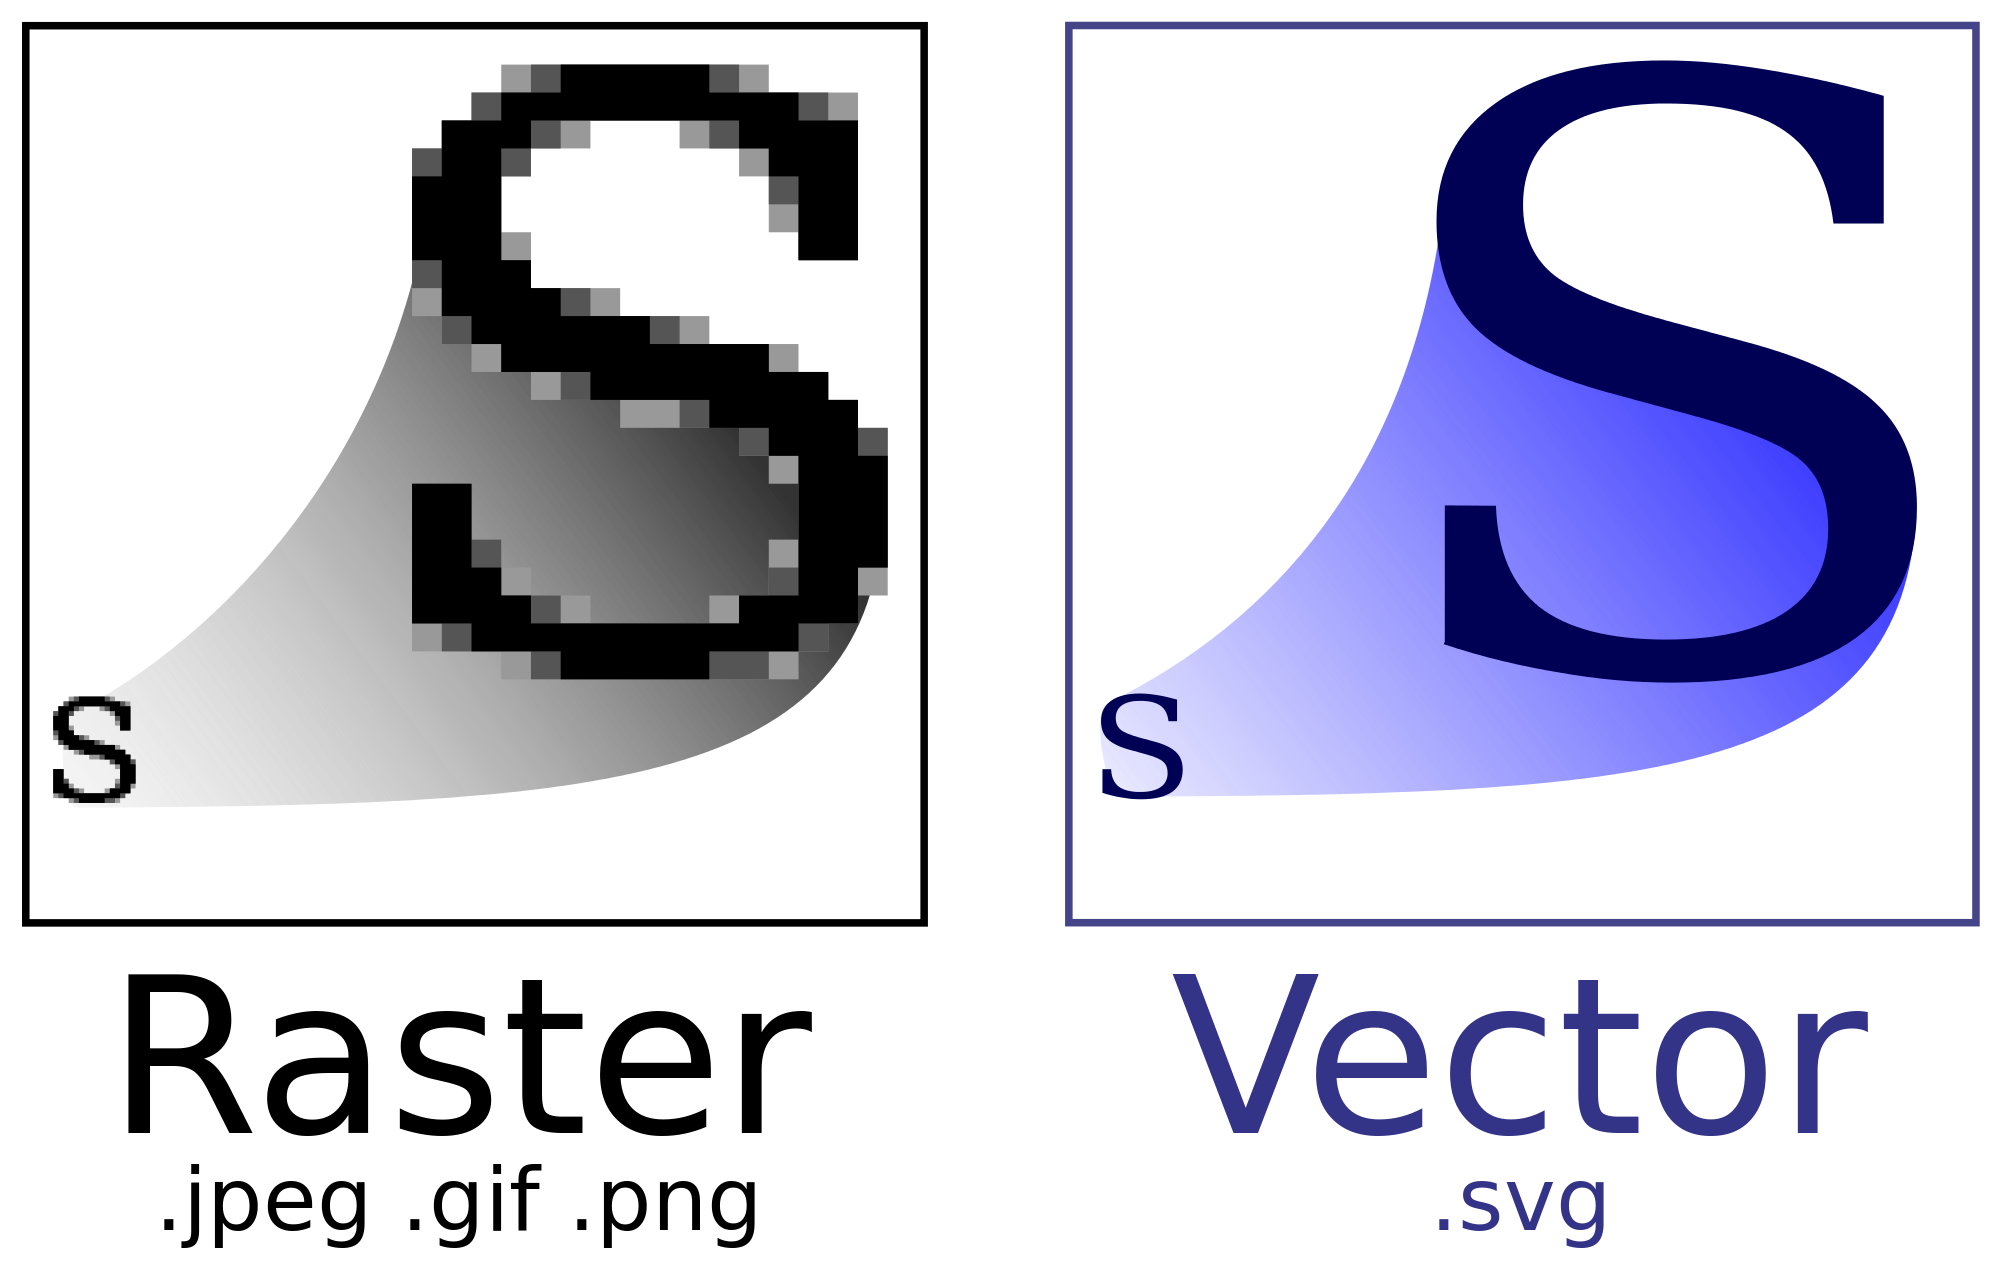 Image showing the difference between raster and vector formats